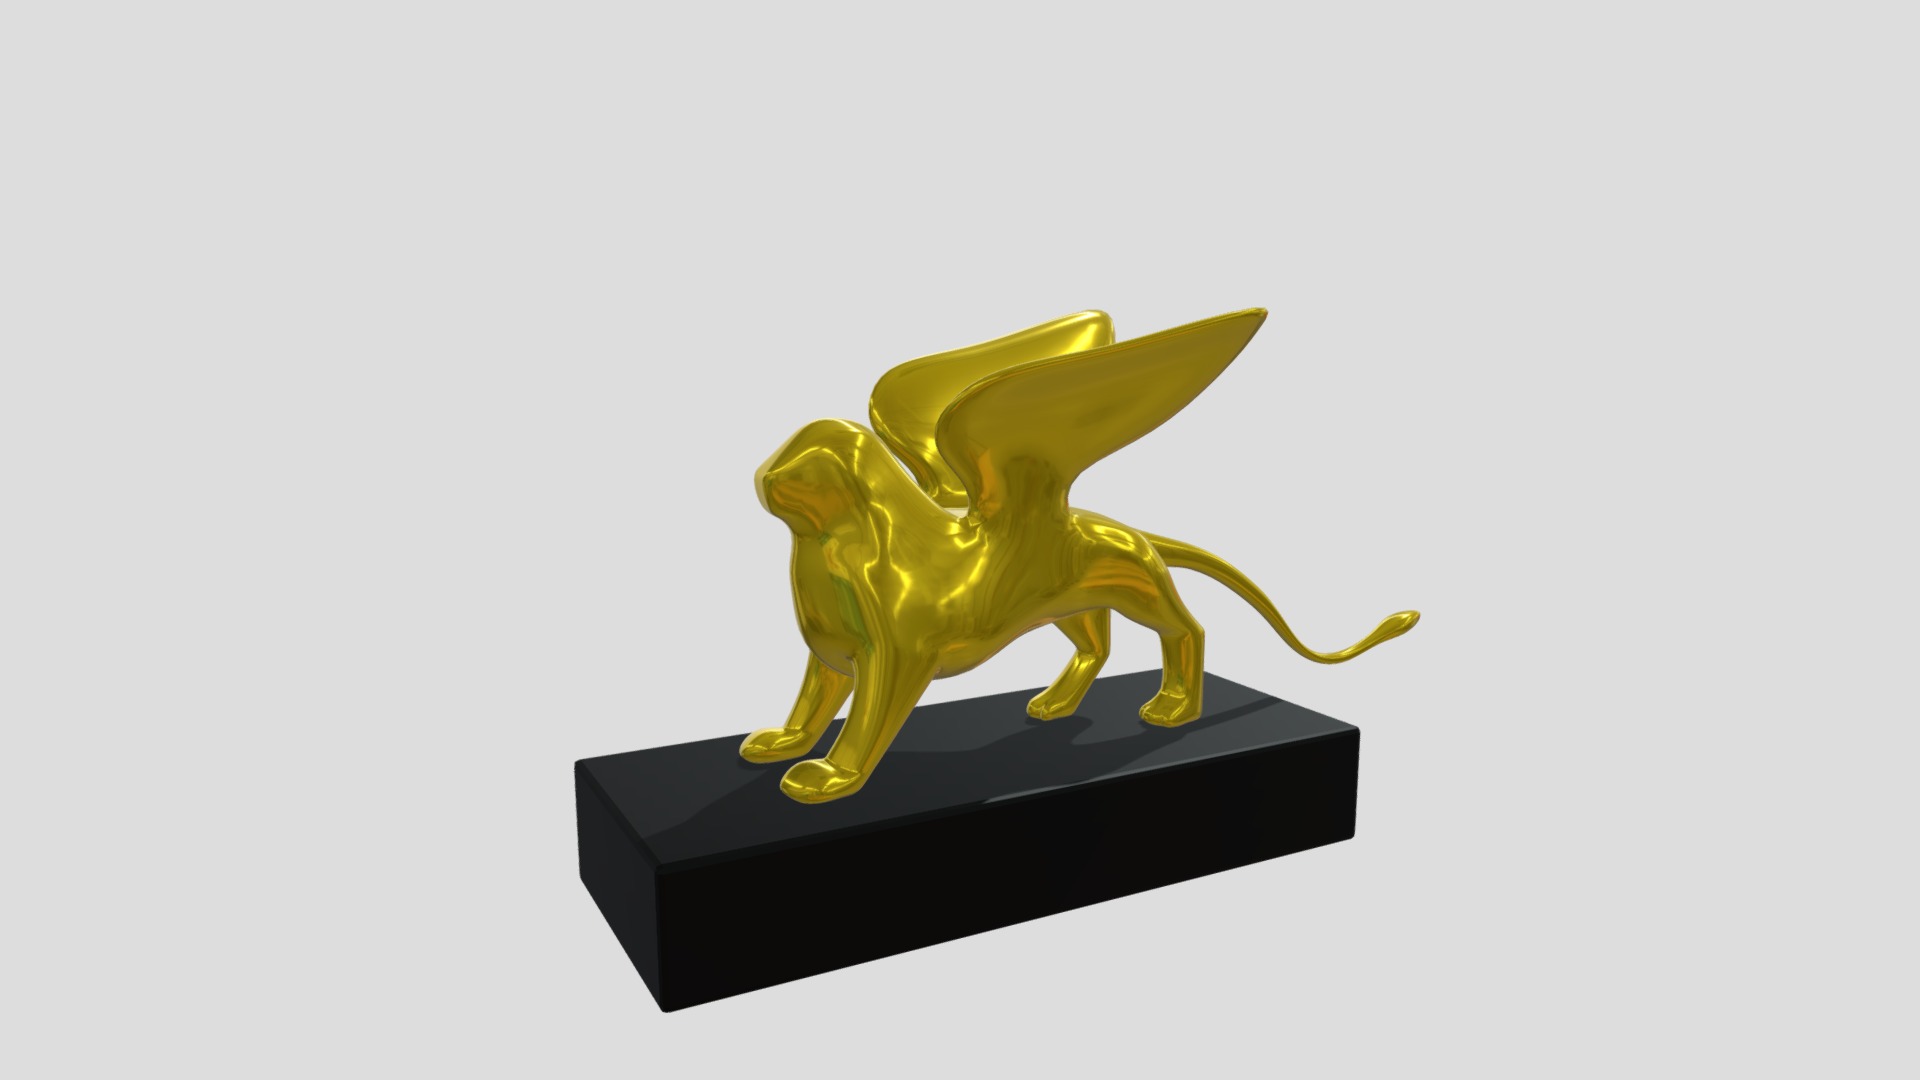 3D model Venice Gold Lion Award - This is a 3D model of the Venice Gold Lion Award. The 3D model is about icon.